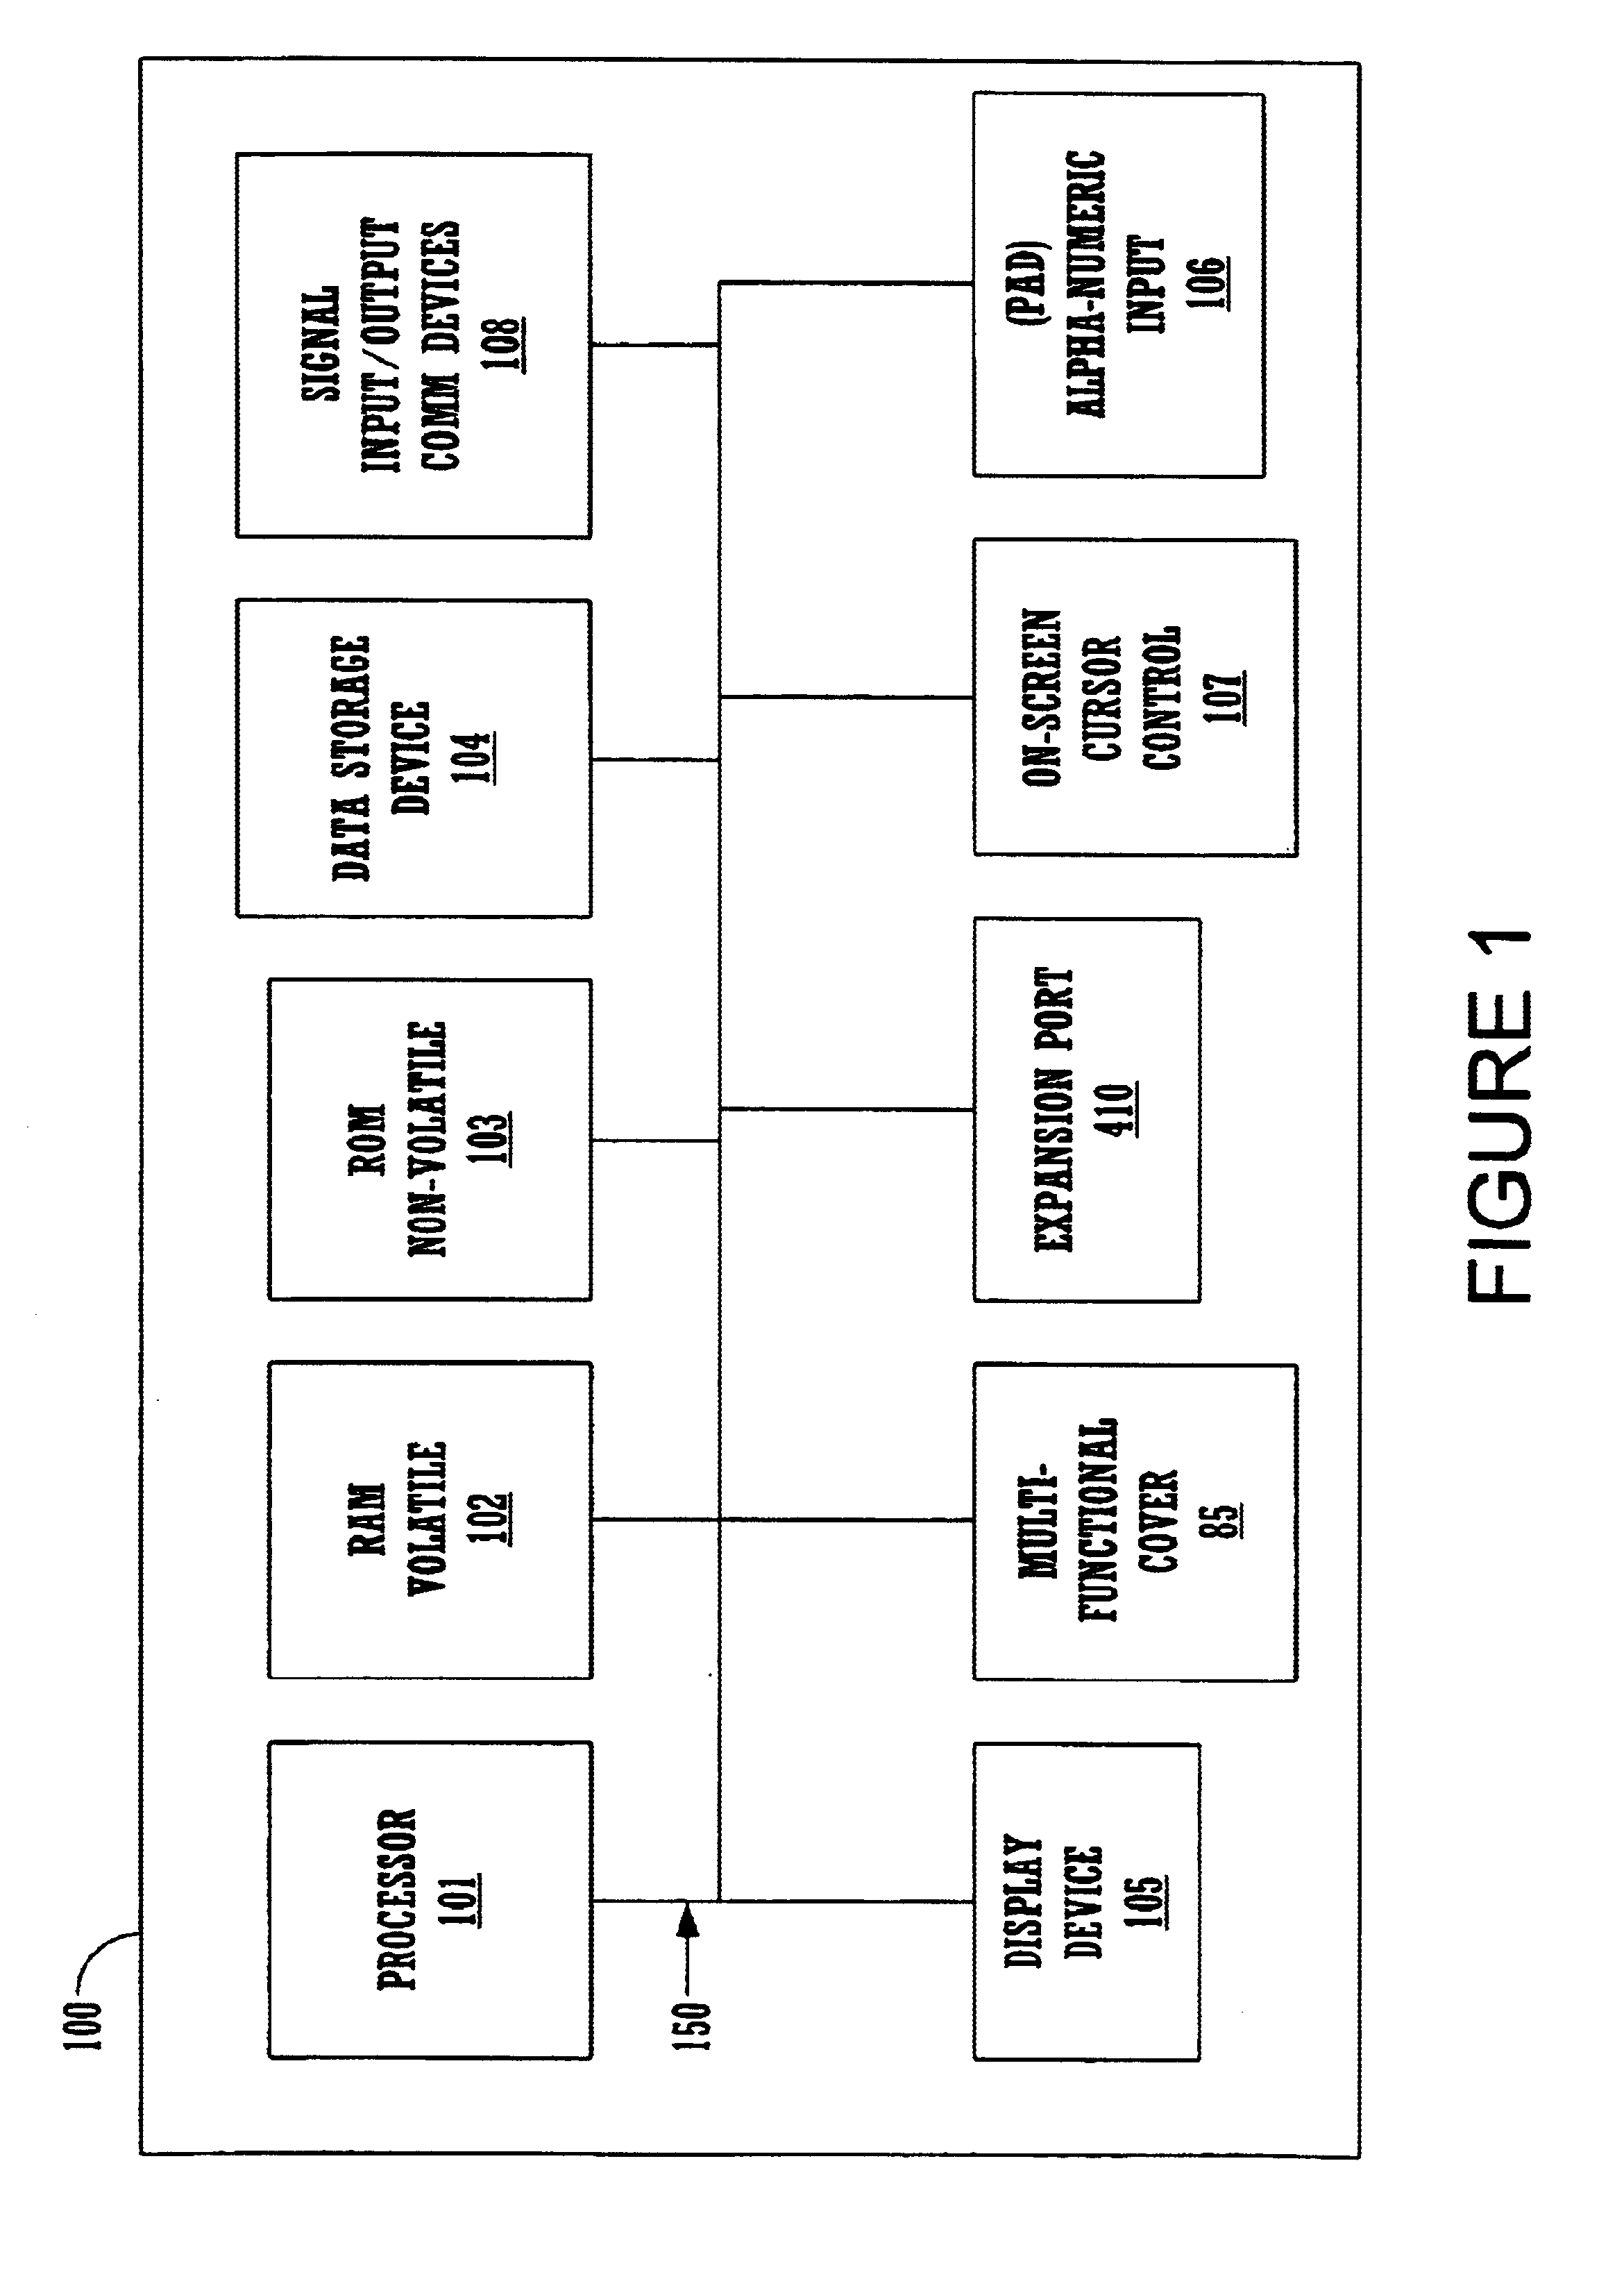 Multifunctional cover integrated into sub-panel of portable electronic device